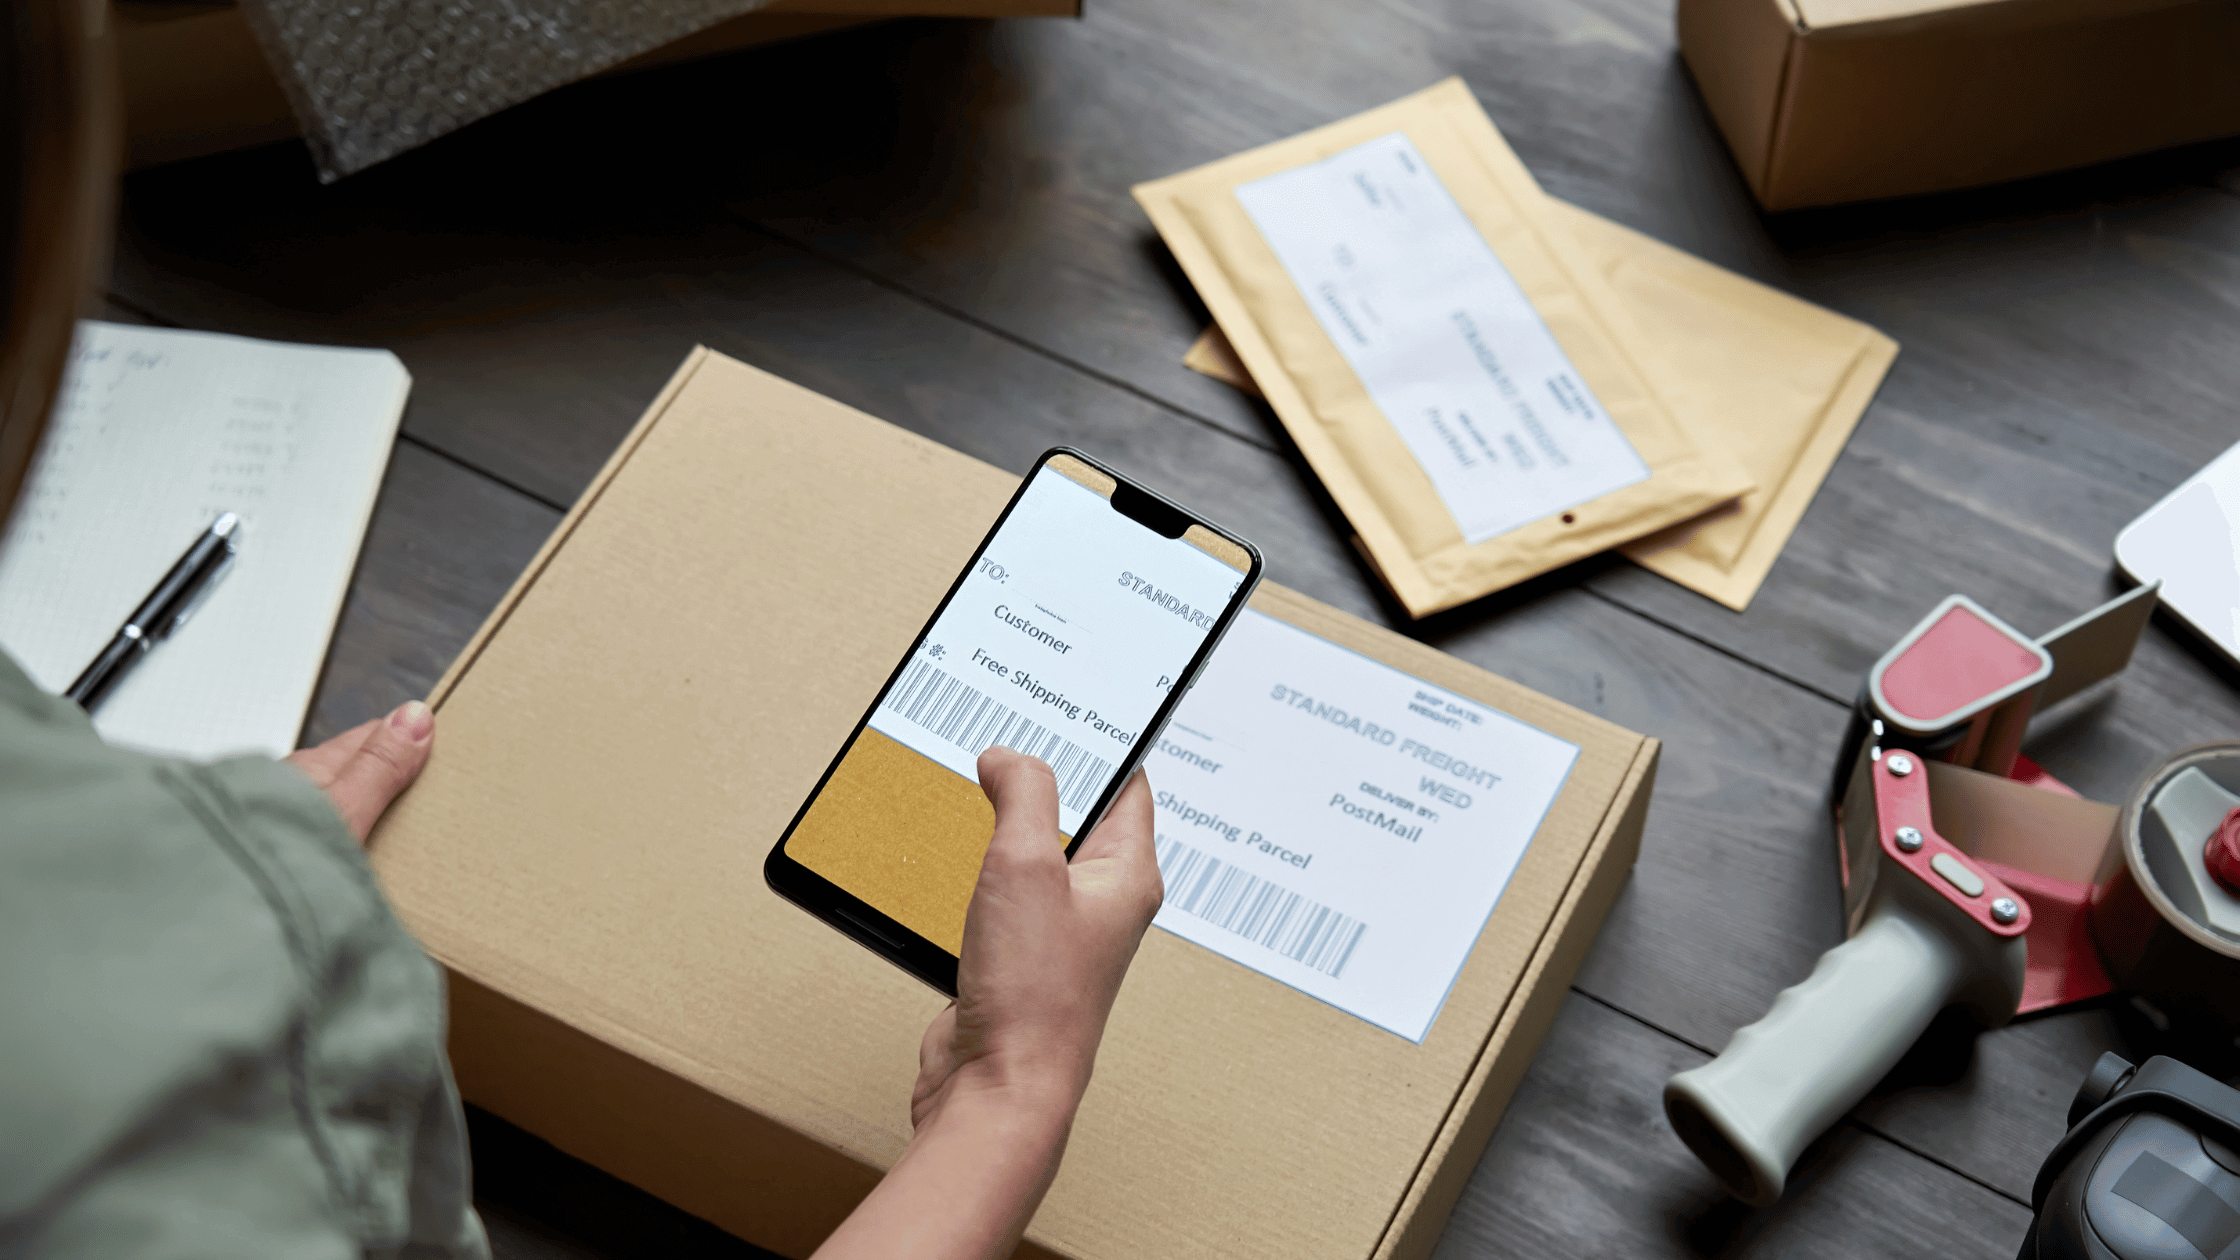 Scanning a barcode label on a box with a mobile phone: 9 Reasons to Resize Your Barcode Labels